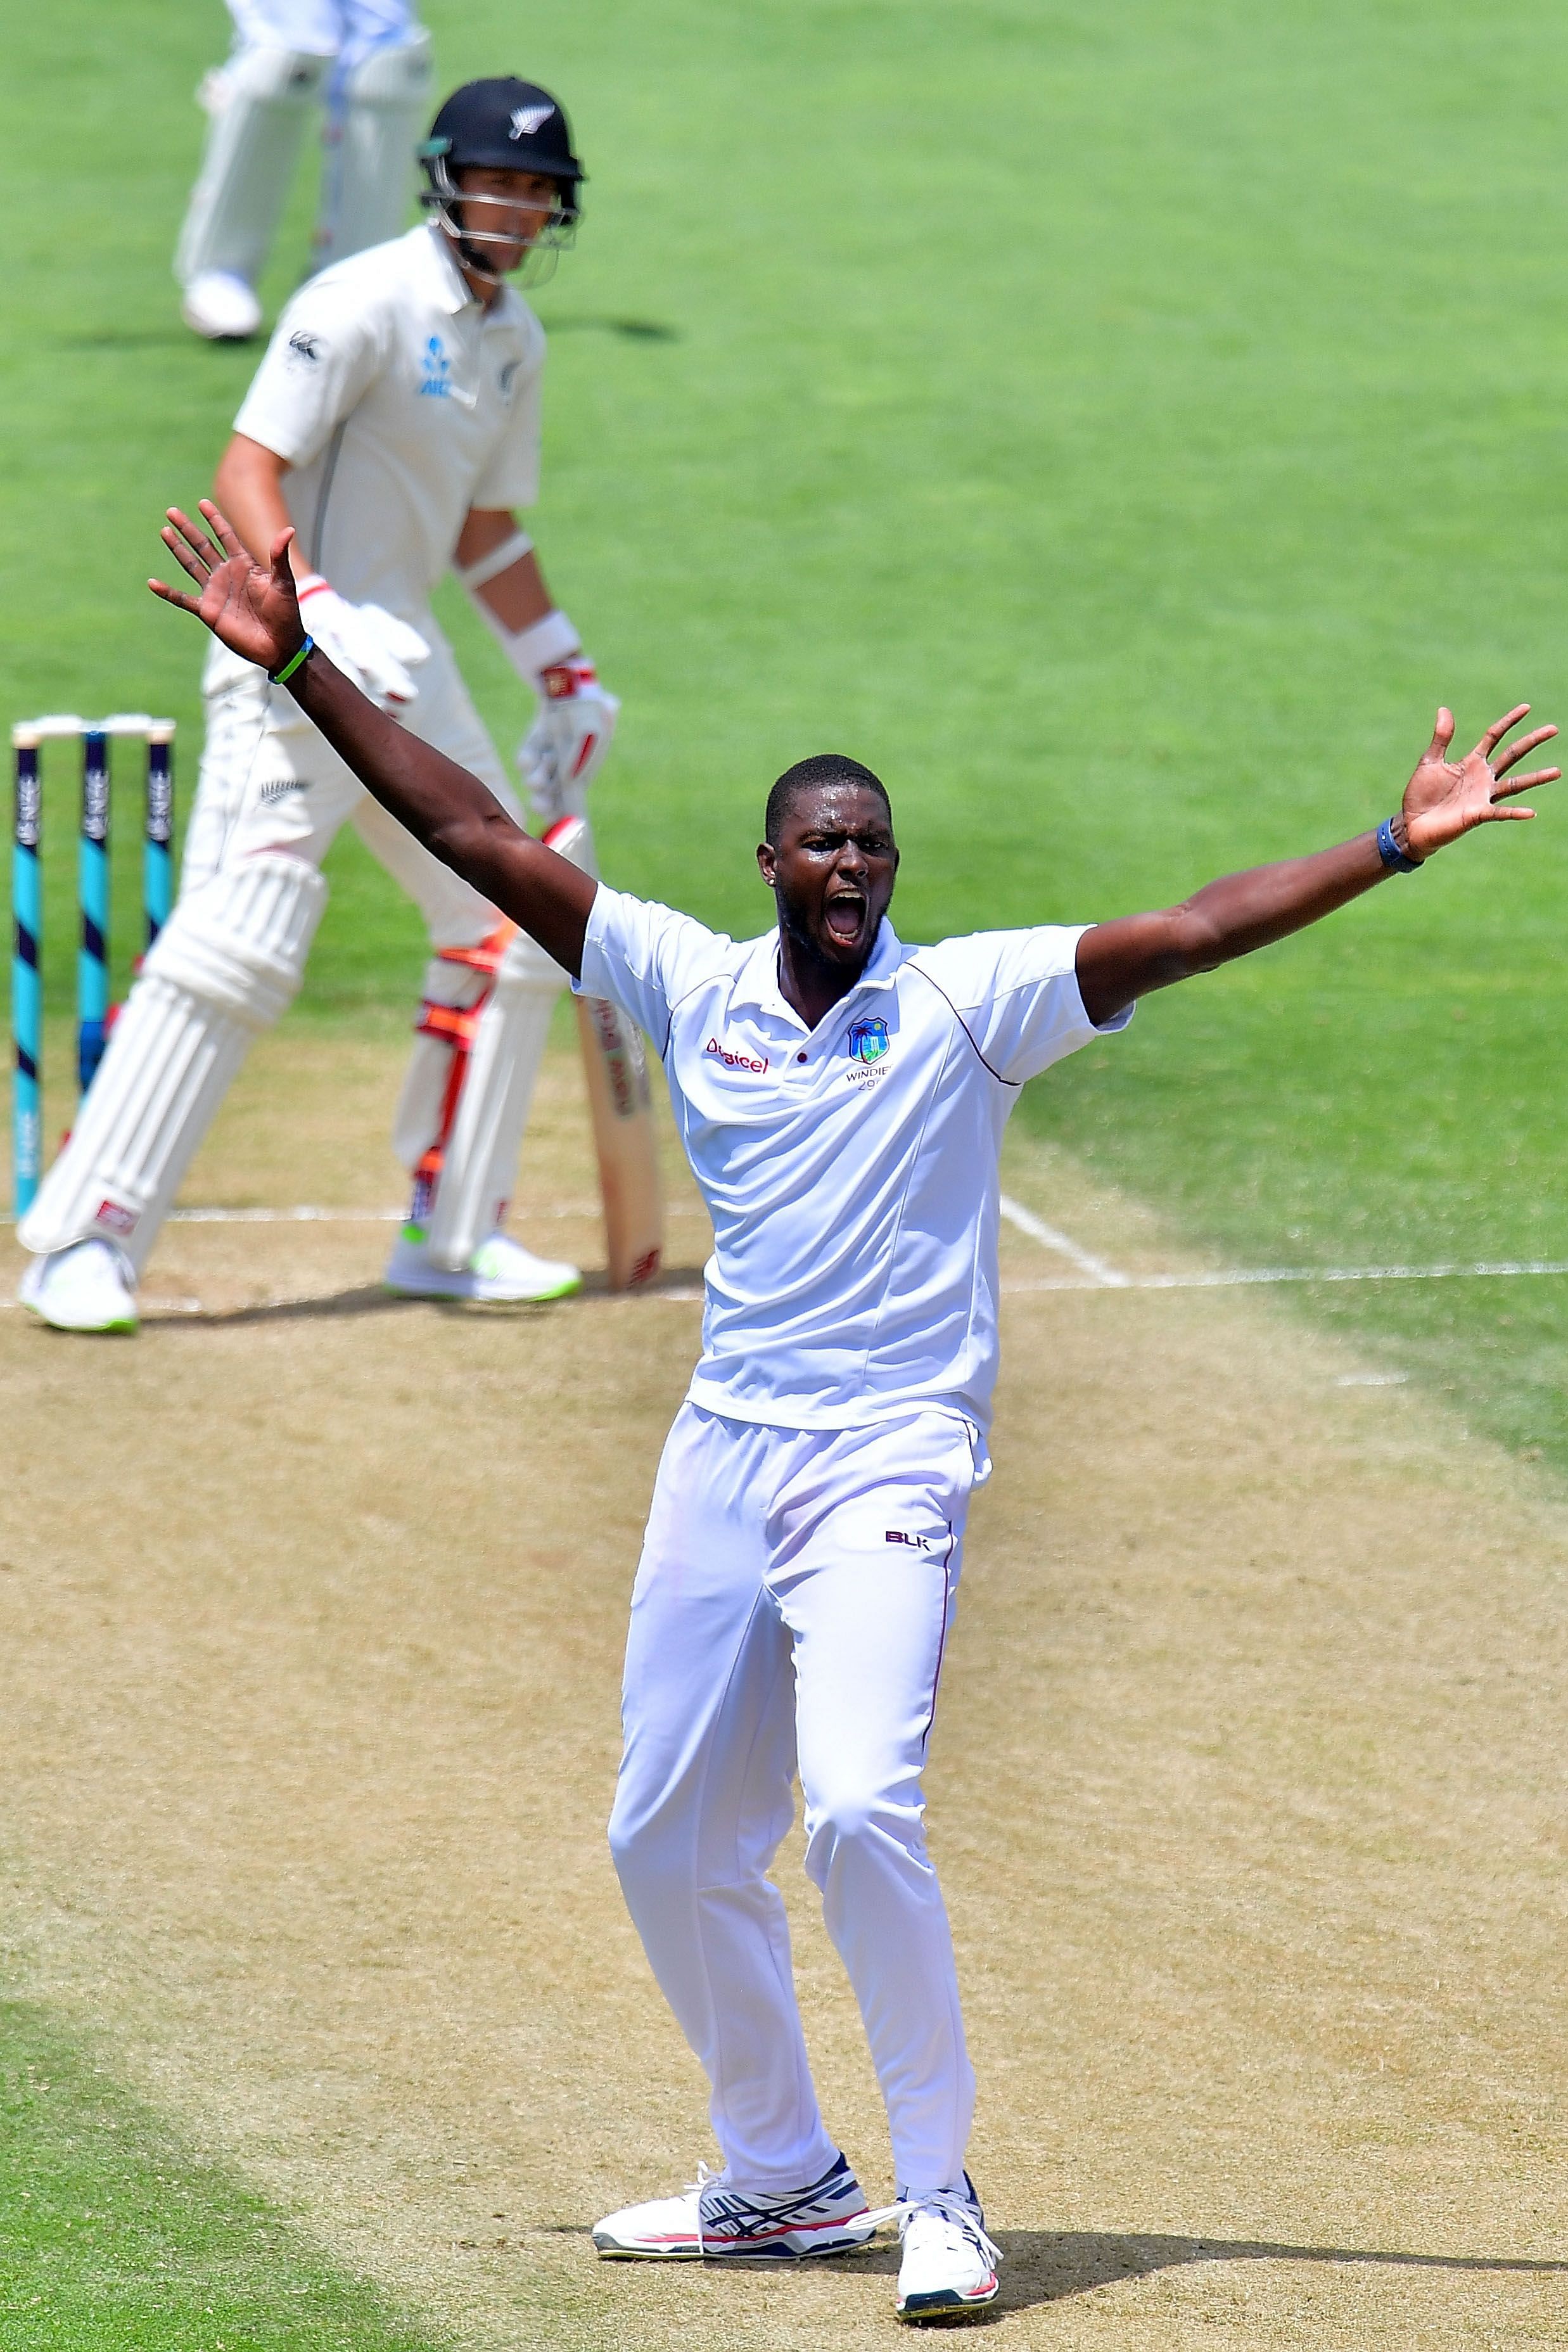 The West Indies's Test captain Jason Holder appeals for a wicket. (AFP Photo)